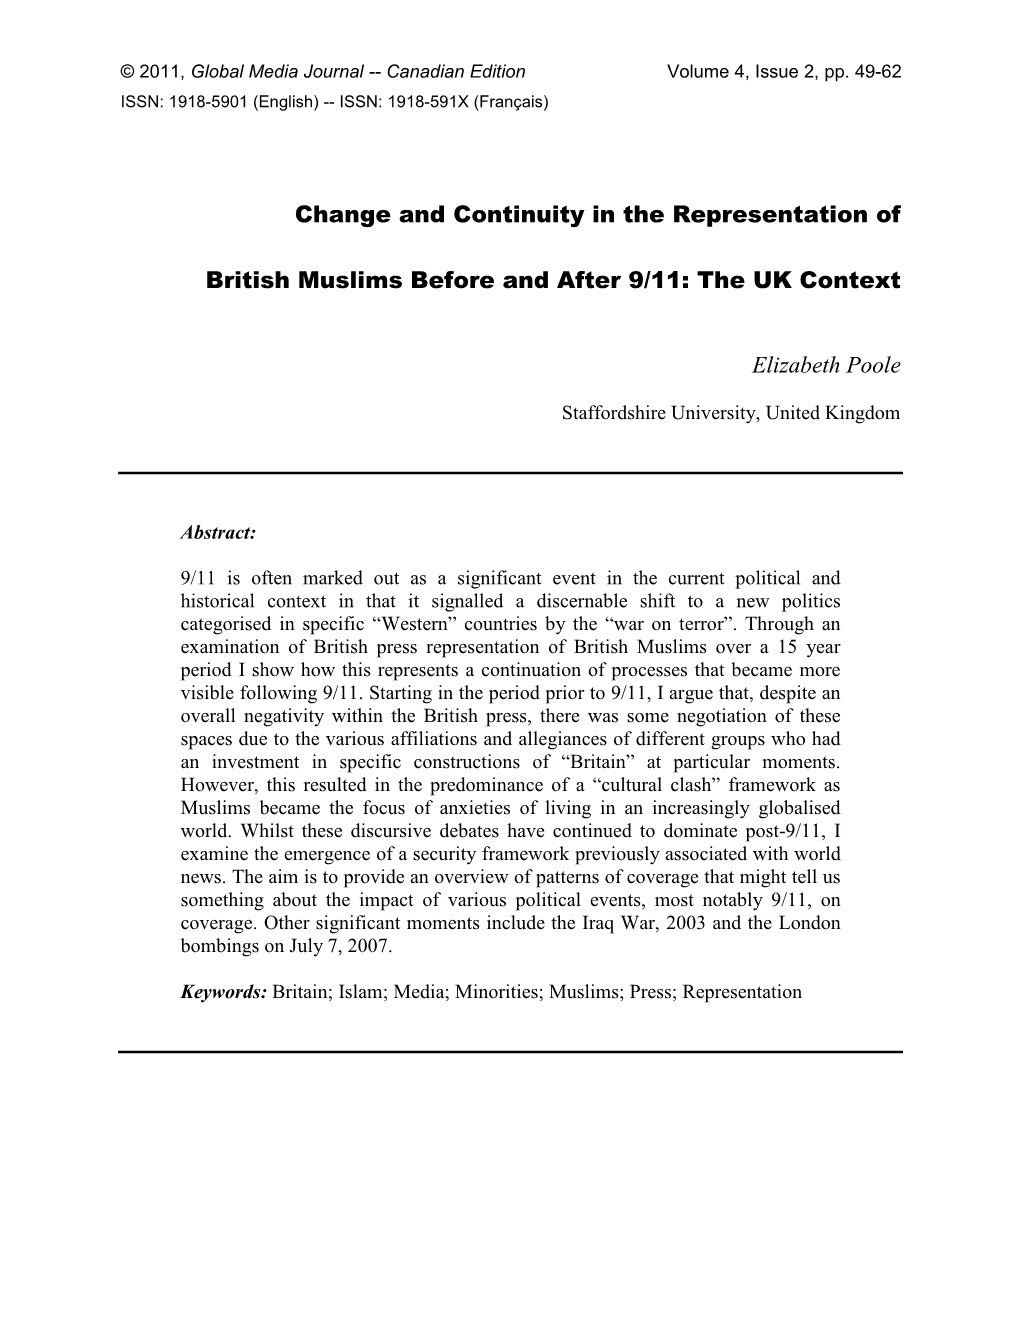 Change and Continuity in the Representation of British Muslims Before and After 9/11: the UK Context Symbolization and Sentiments” in Order to Build Solidarities